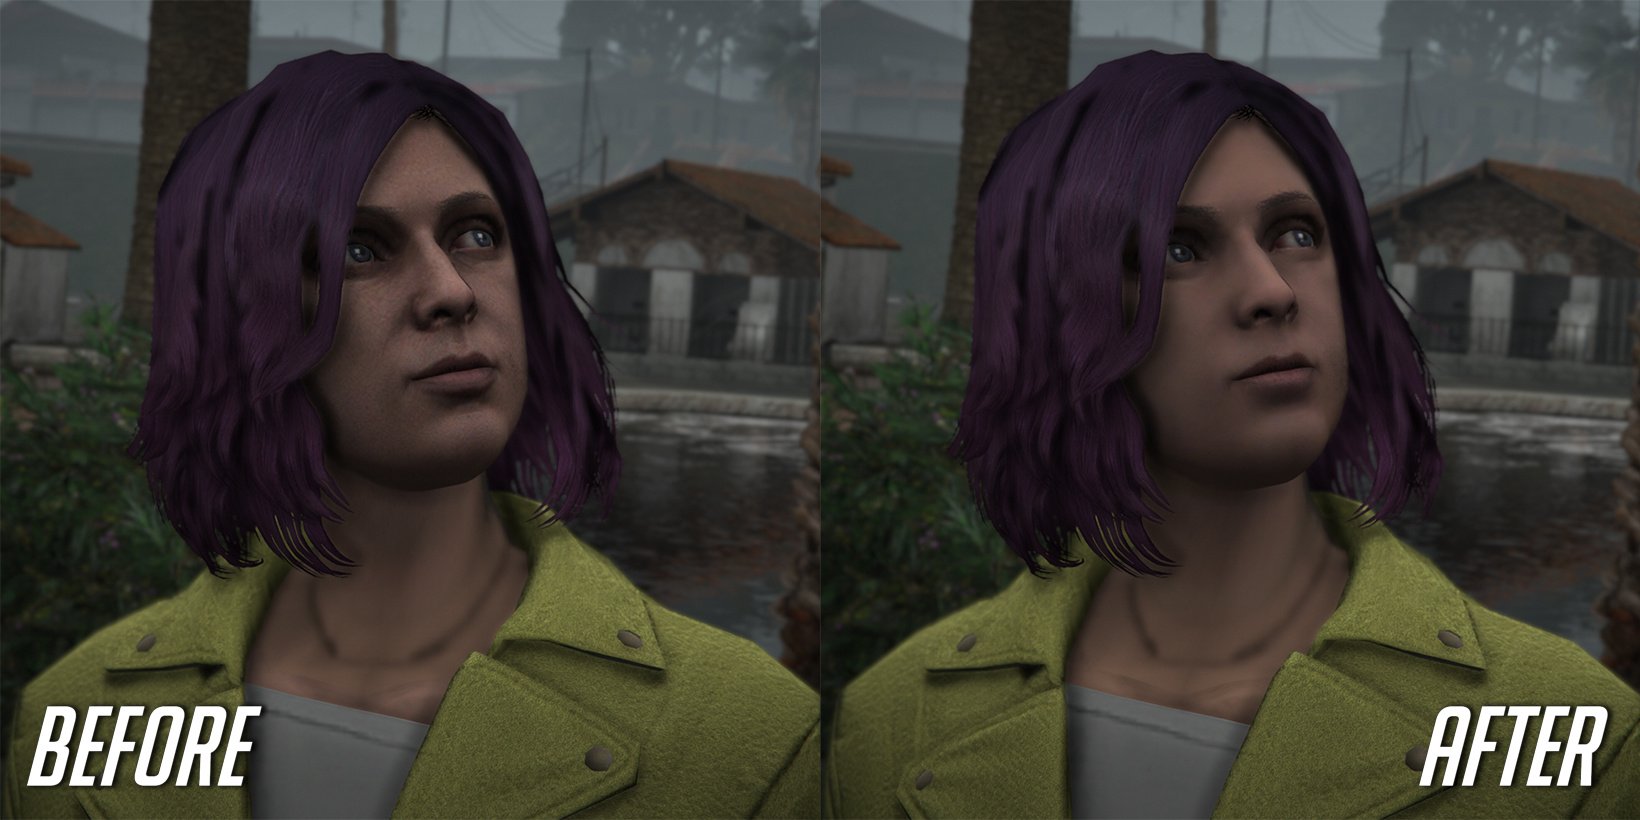 Improving All Mp Female Characters Appearance Gta5